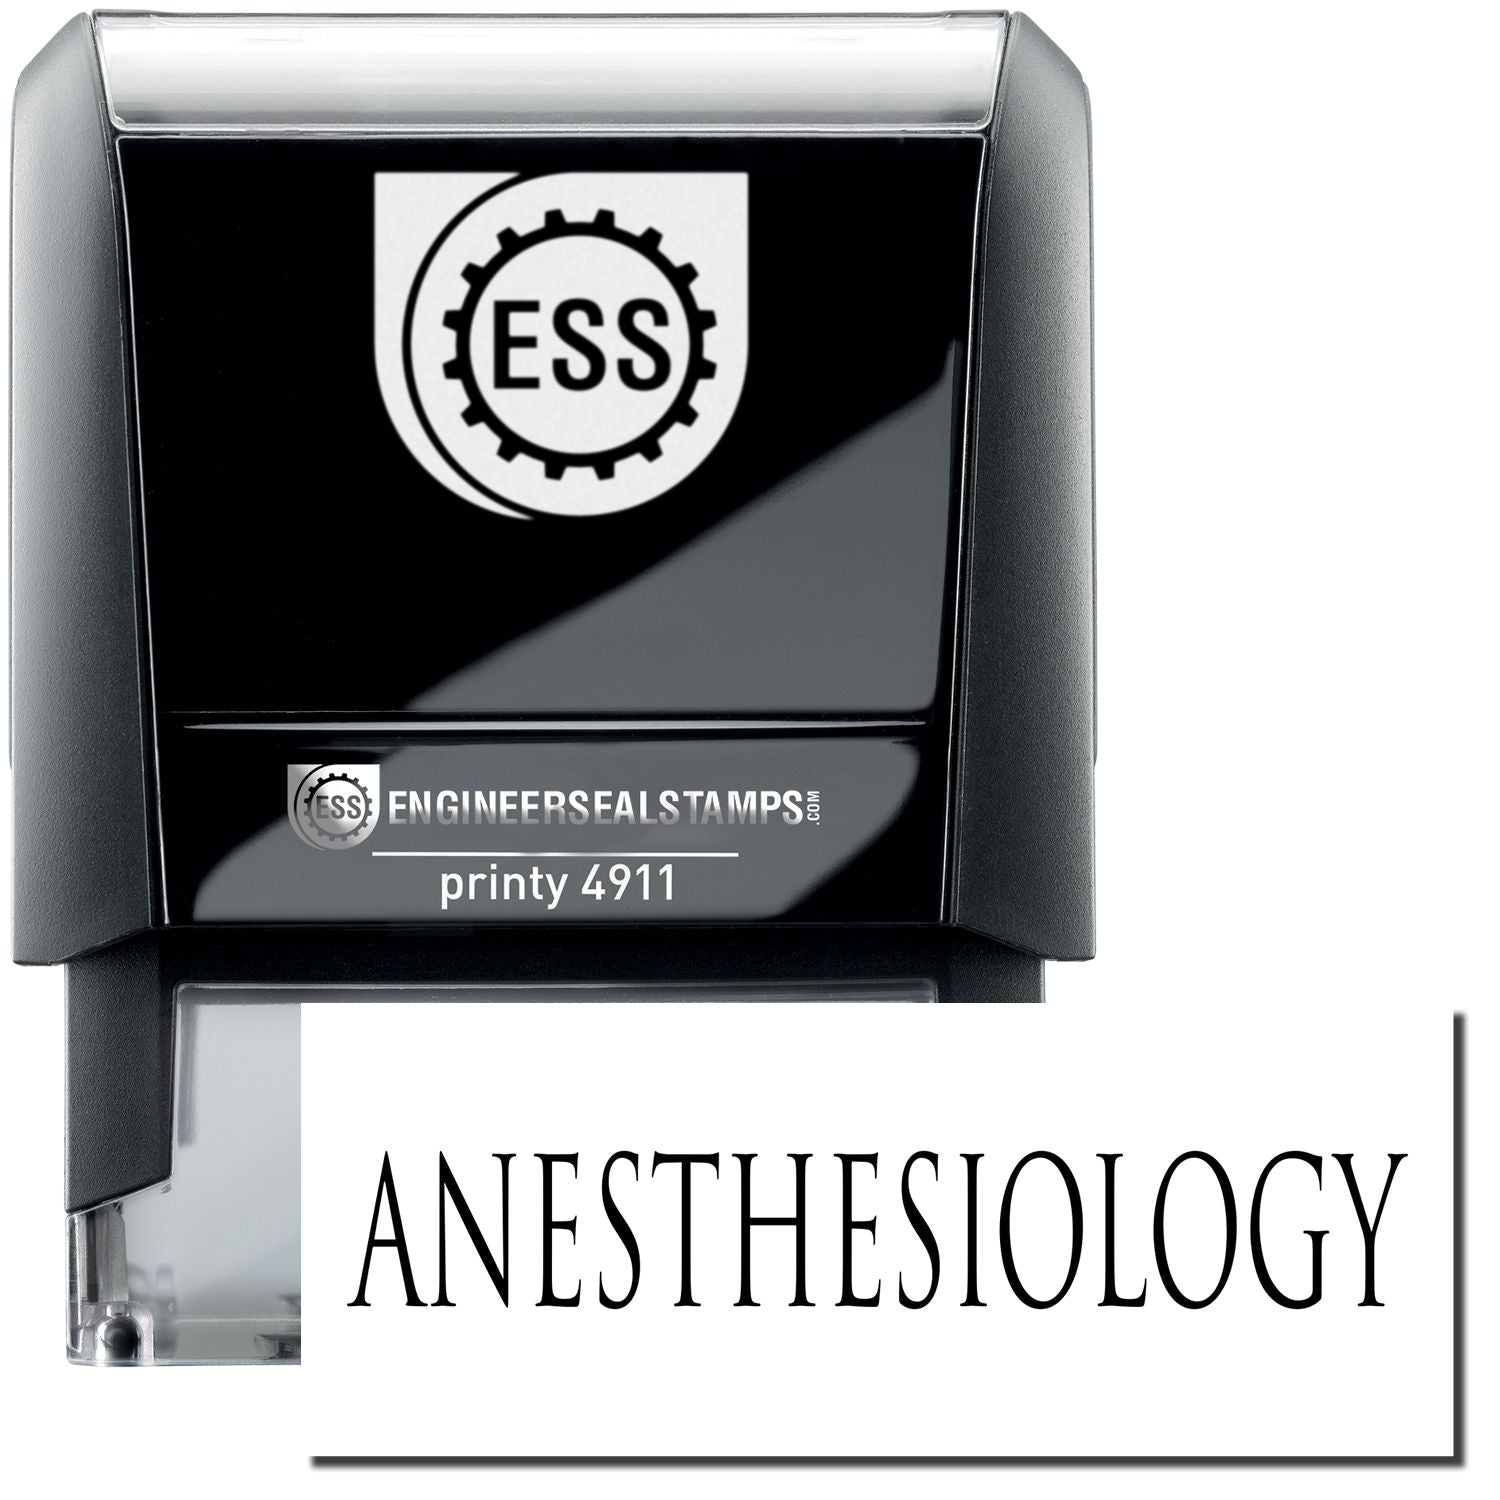 A self-inking stamp with a stamped image showing how the text "ANESTHESIOLOGY" is displayed after stamping.